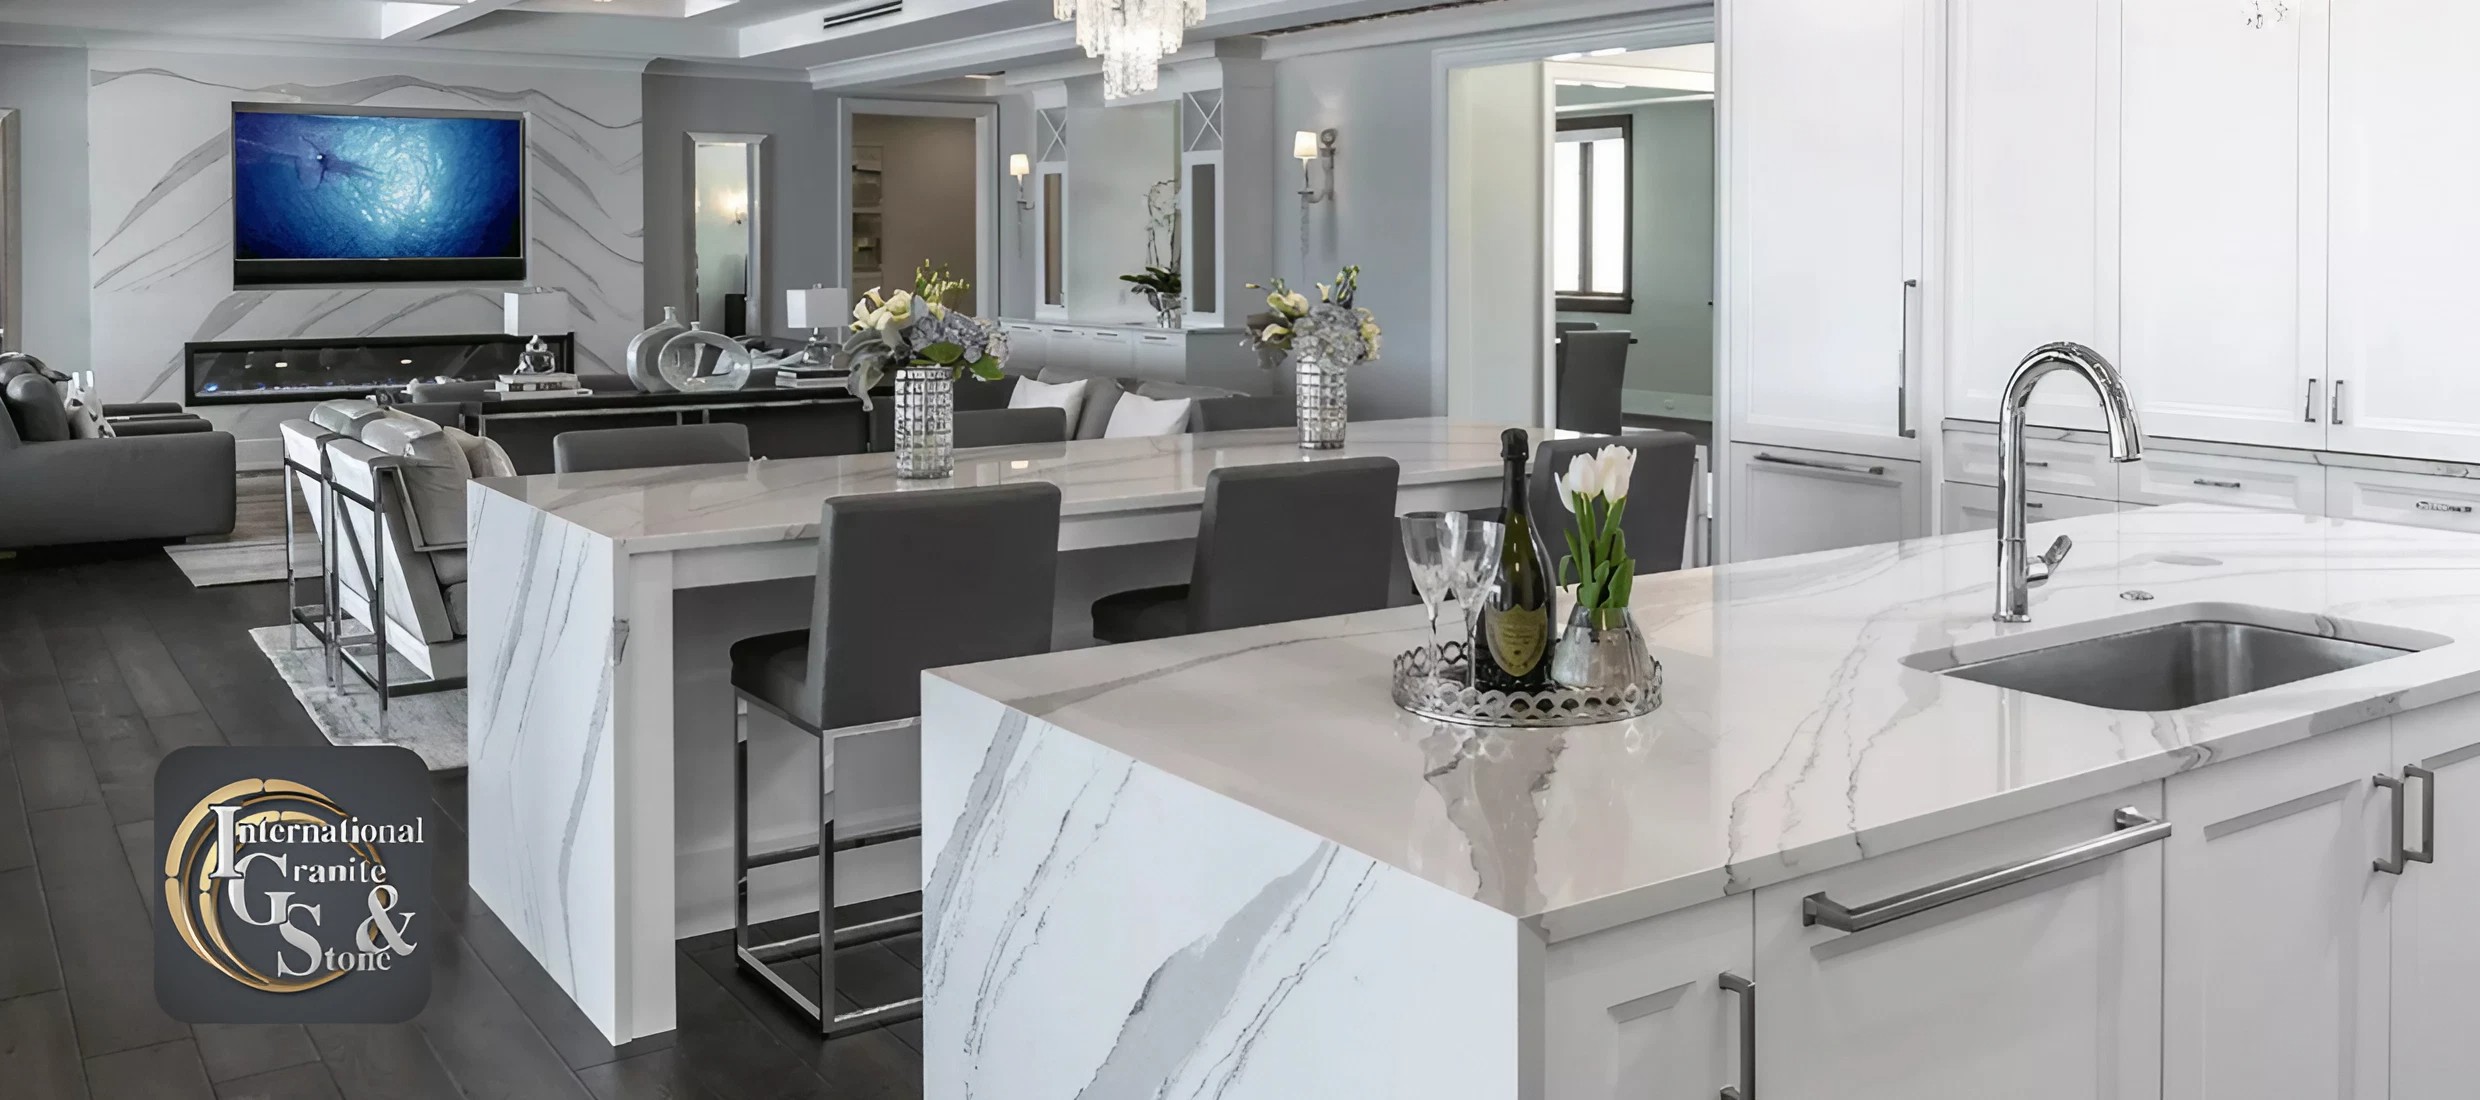 Image providing a detailed pricing breakdown and analysis for countertops installed by IGS Countertops, showcasing various material options, fabrication, and installation costs, along with any additional features or services included.